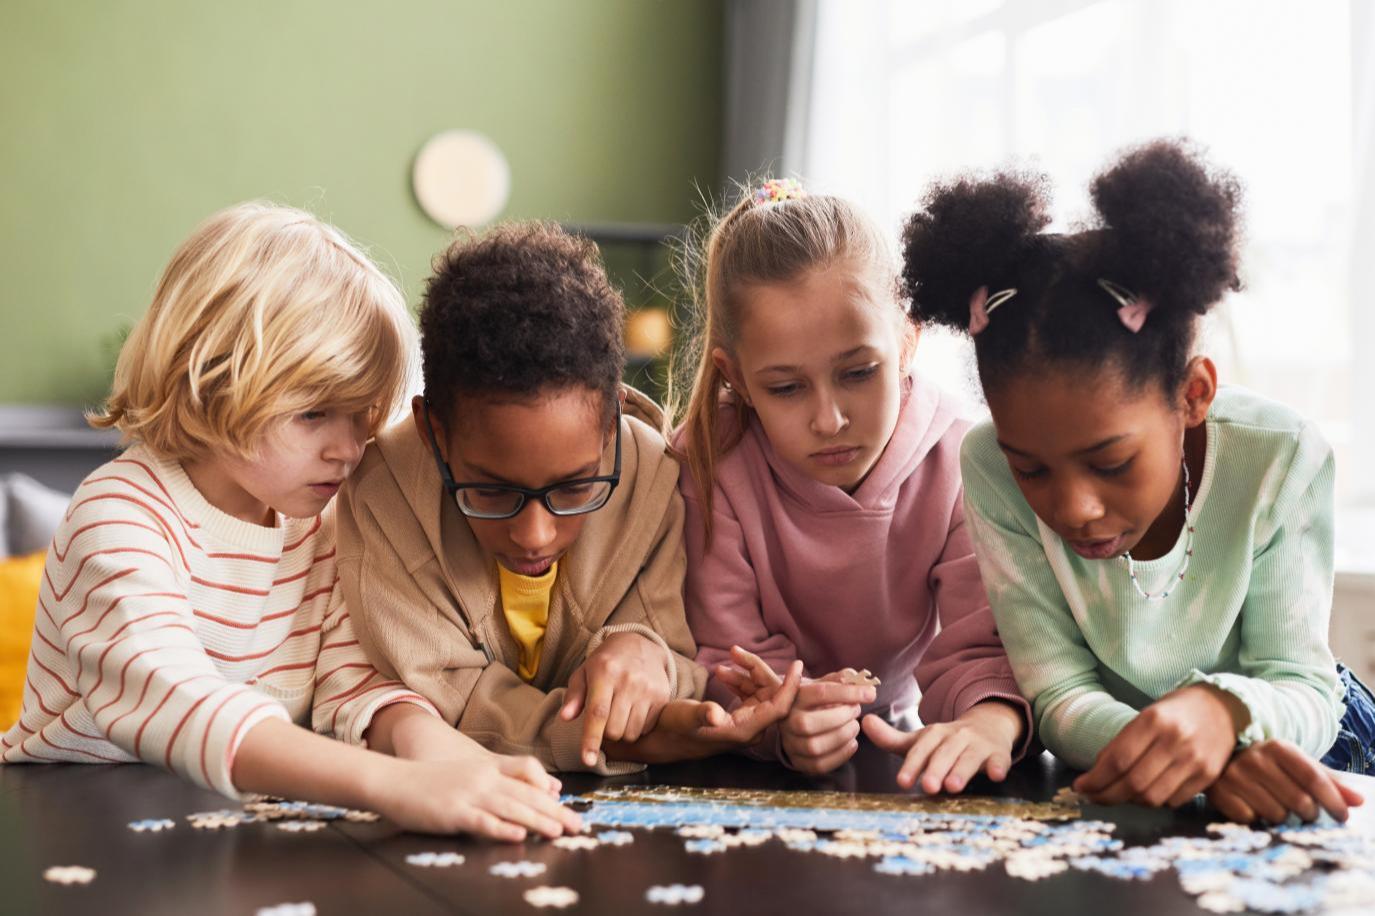 Four children putting together a puzzle on a table